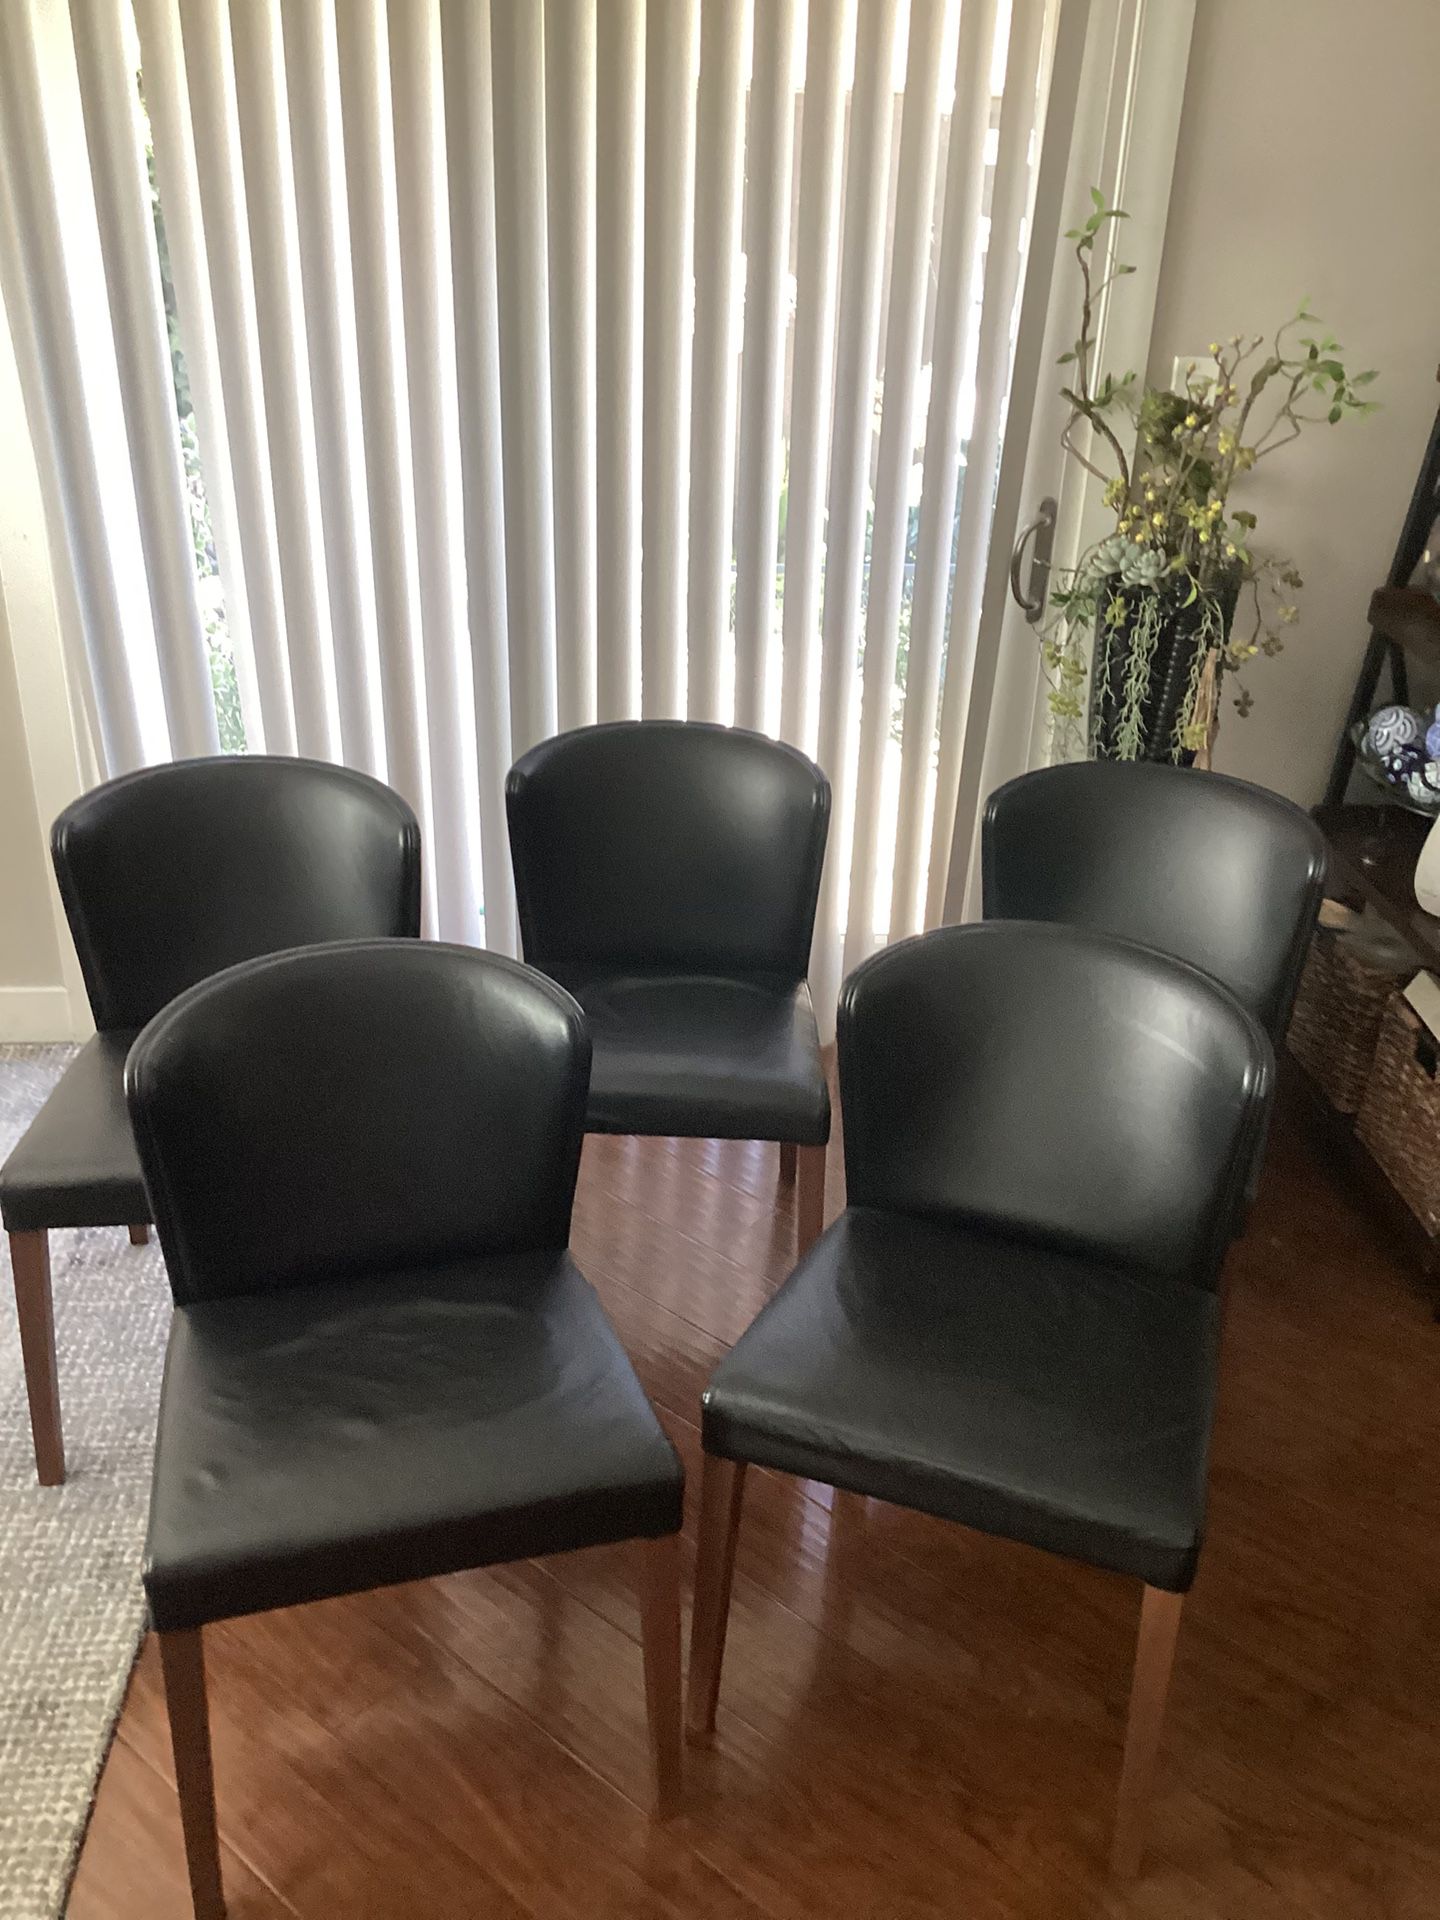 5 Grate &Barrel  Dining Chairs 